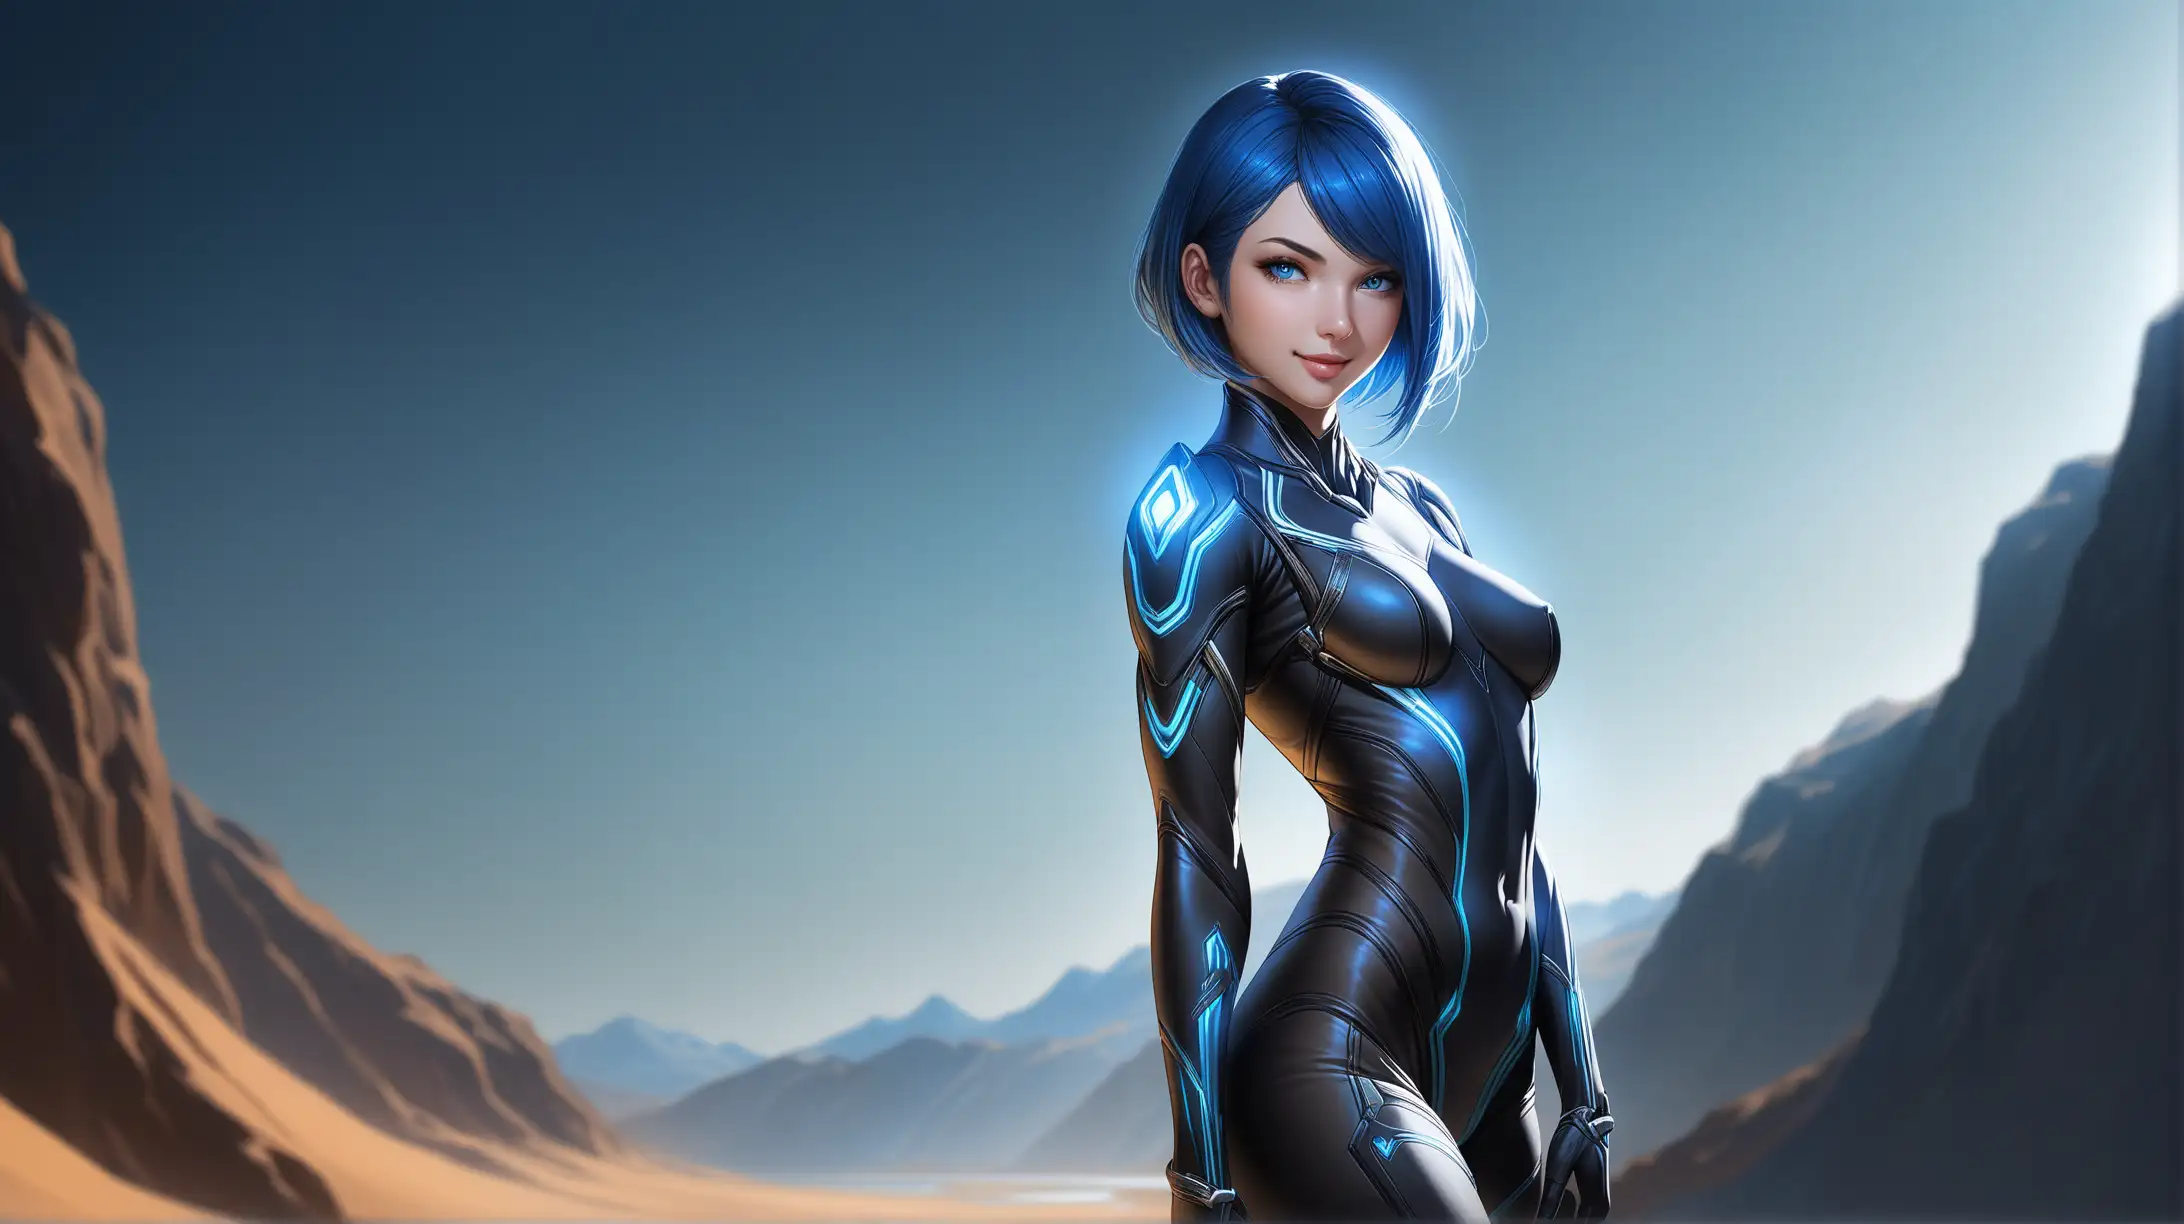 Draw a woman, short blue hair covering one eye, blue eyes, slender figure, high quality, realistic, accurate, detailed, long shot, ambient lighting, outdoors, outfit inspired by Warframe, seductive pose, smiling at the viewer